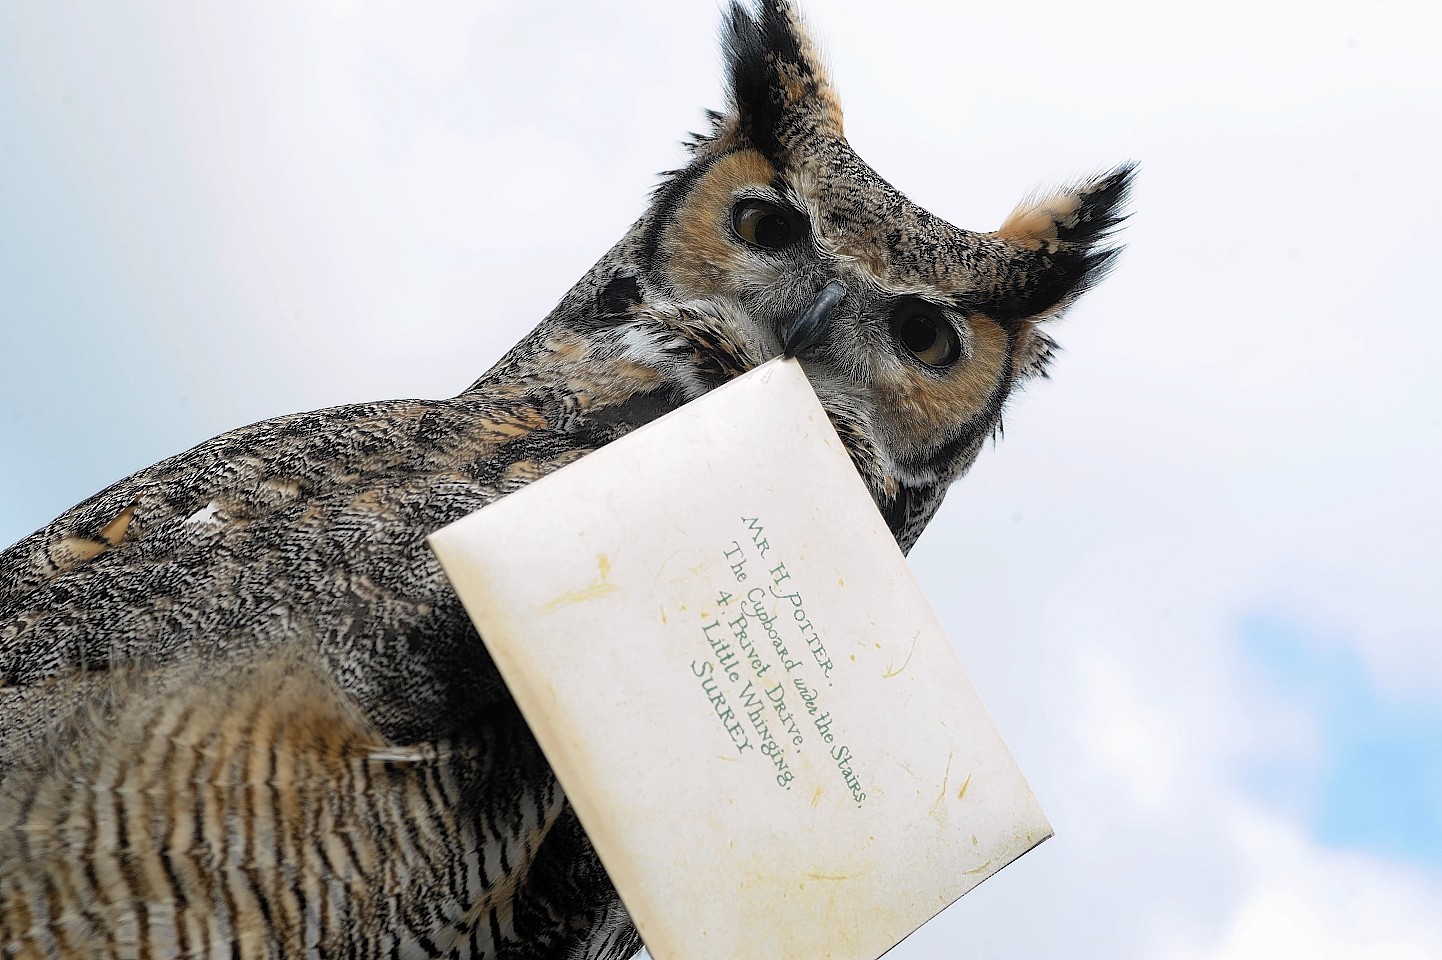 Home of Harry Potter owls receives £25,000 boost